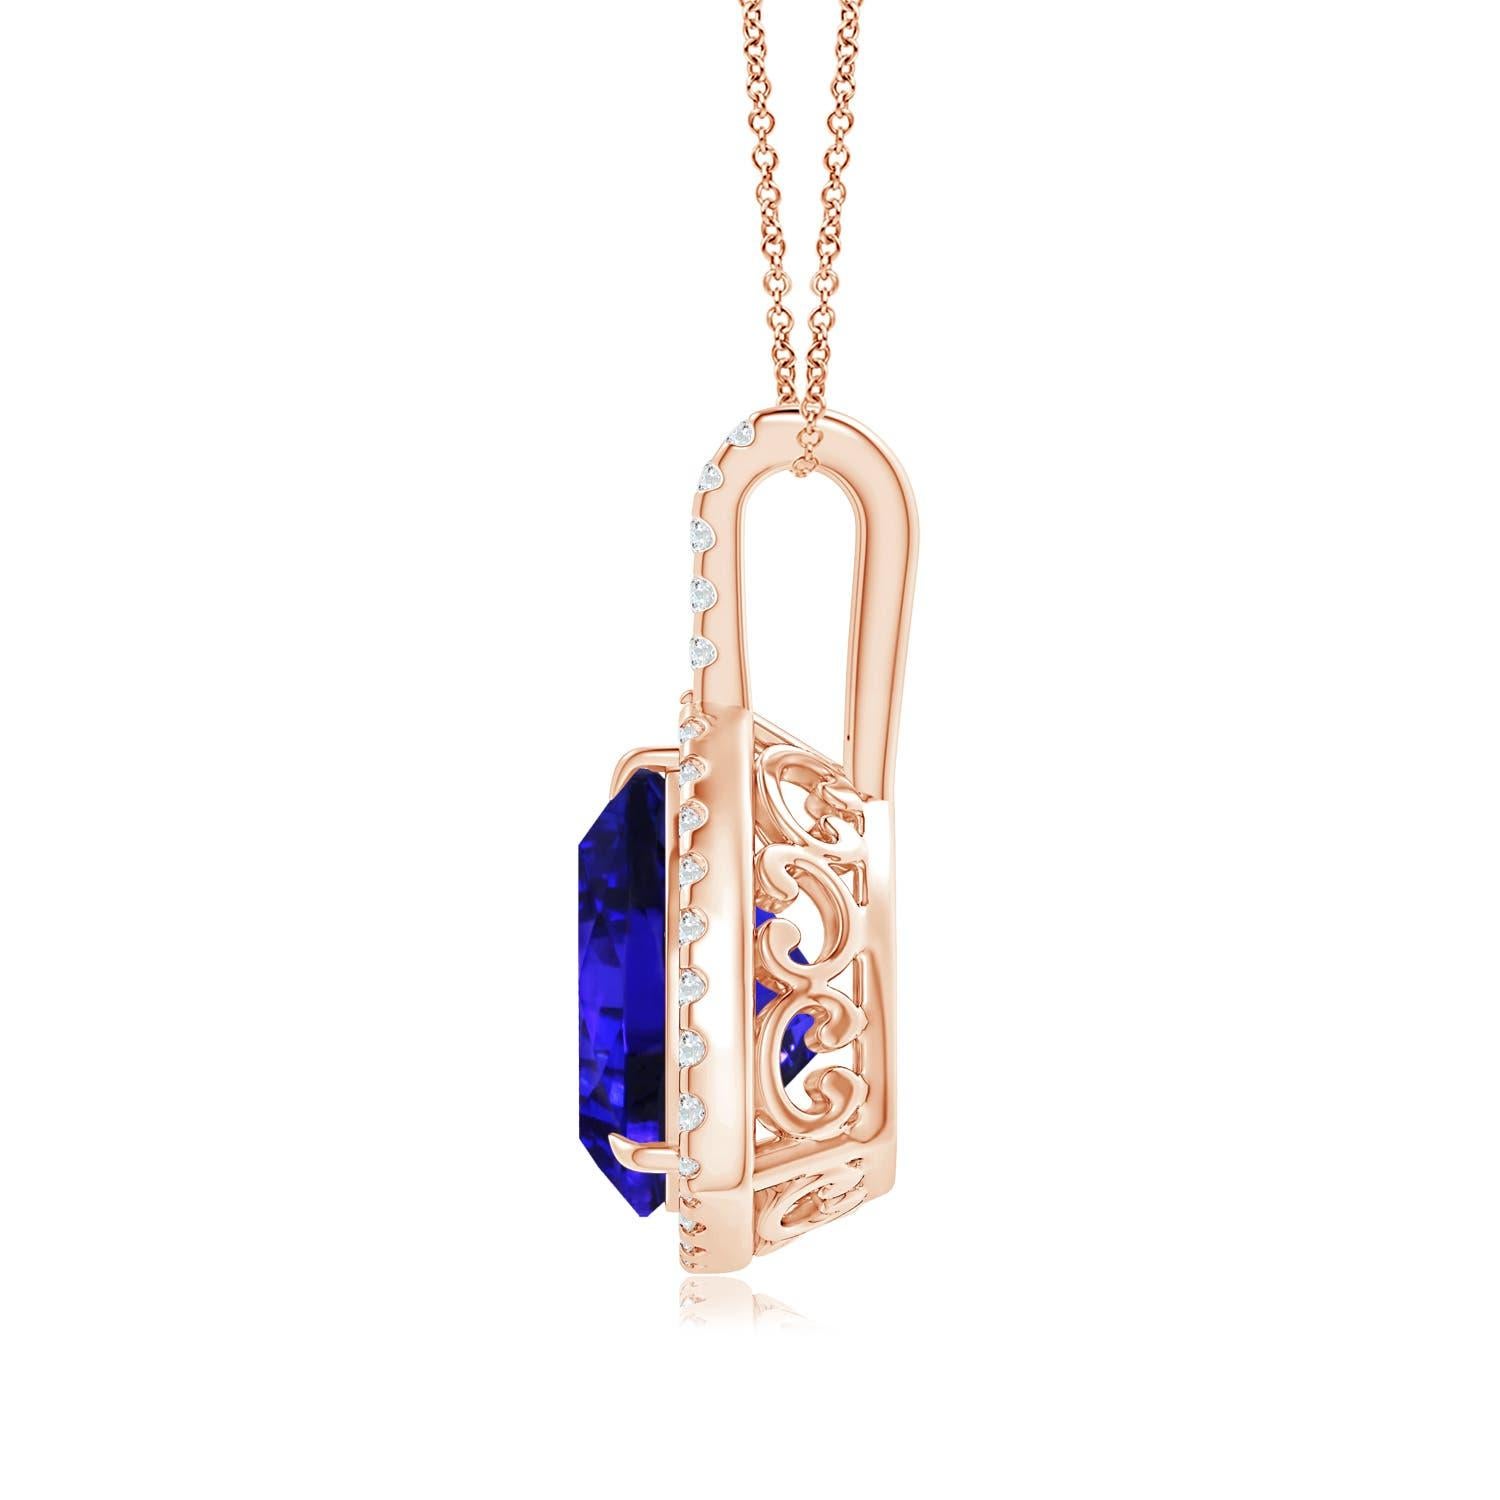 Designed with a diamond-studded bale and elegant scrollwork on the metal, this trillion tanzanite halo pendant in 18k rose gold looks simple yet enigmatic. The brilliant u prong diamonds enhance the bluish-purple hue of the GIA certified